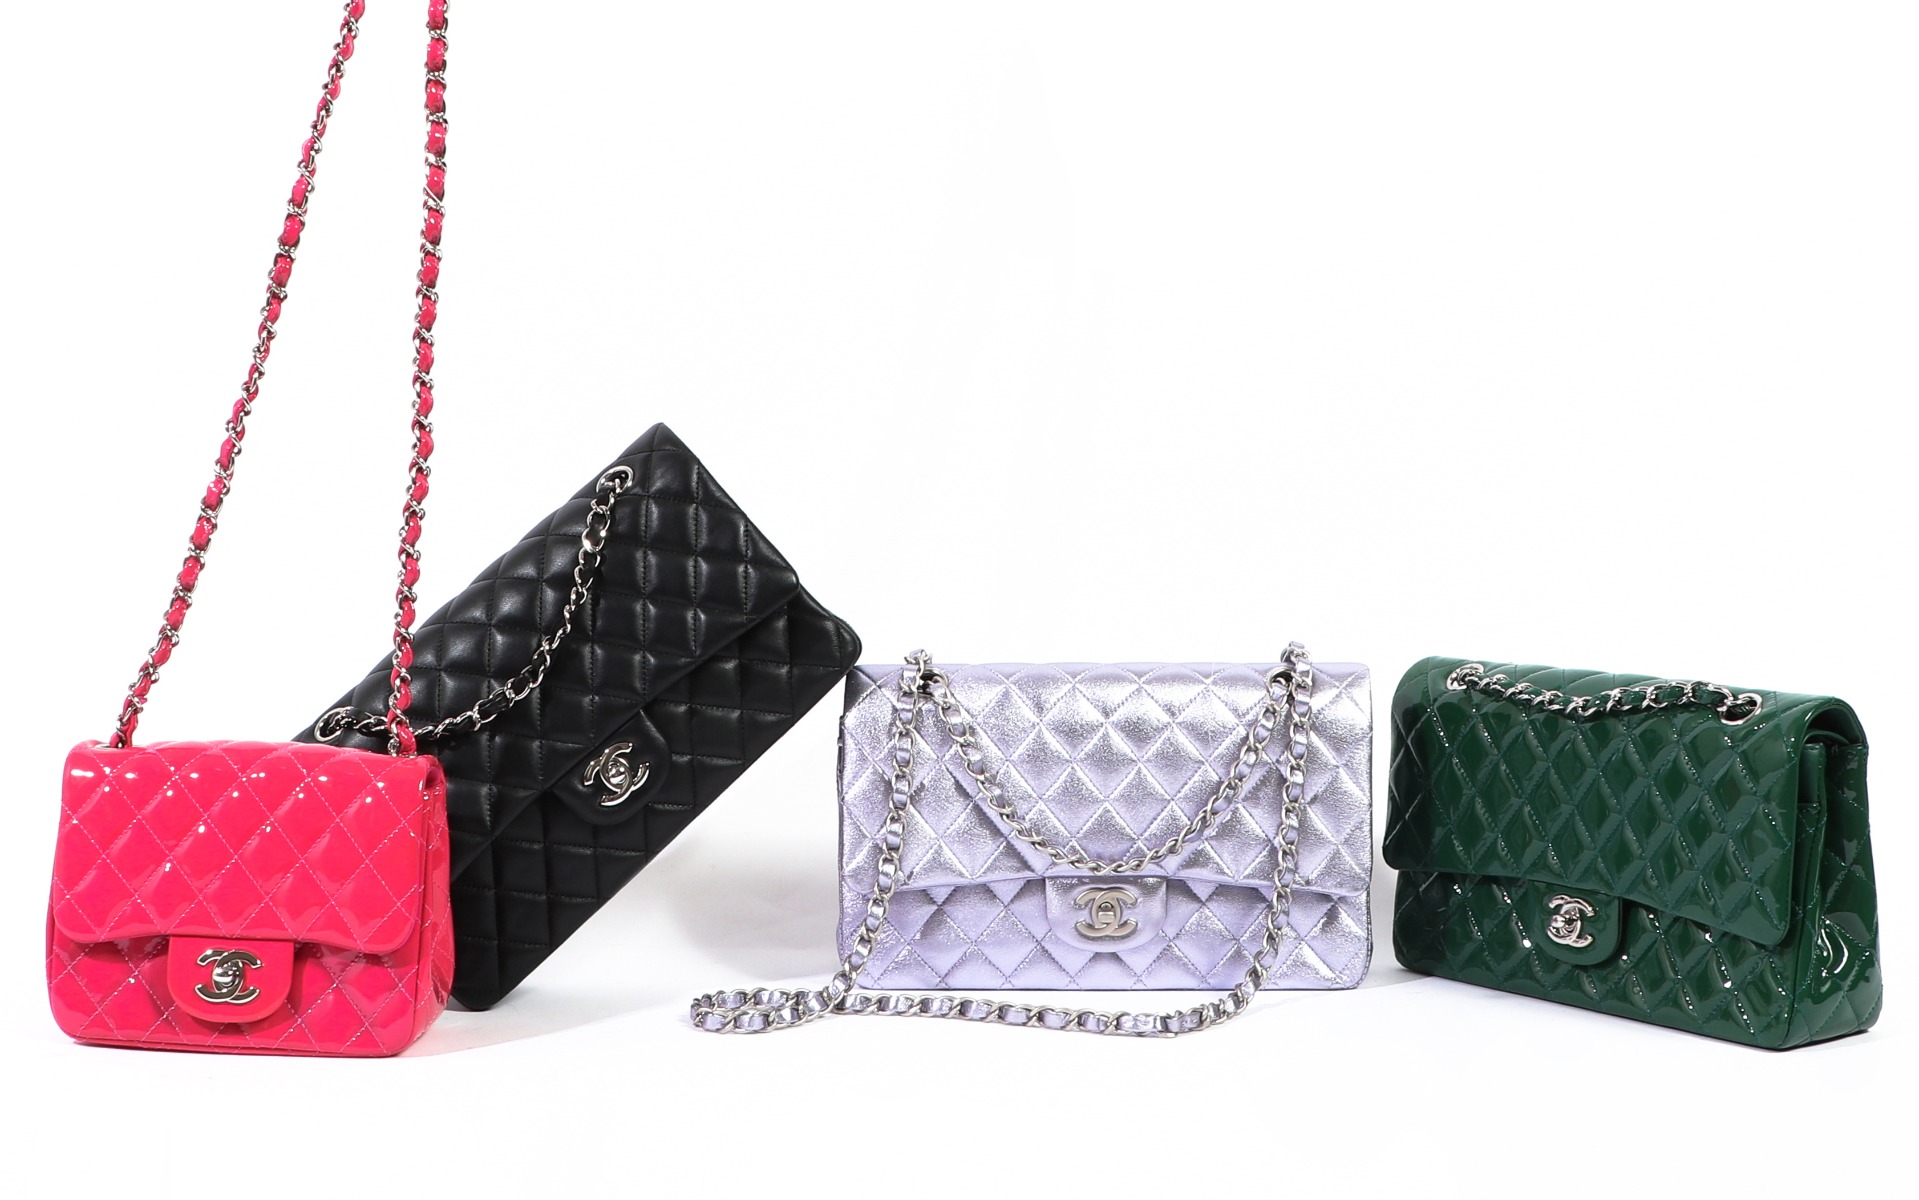 Investment bags: prices rising again at Chanel 2